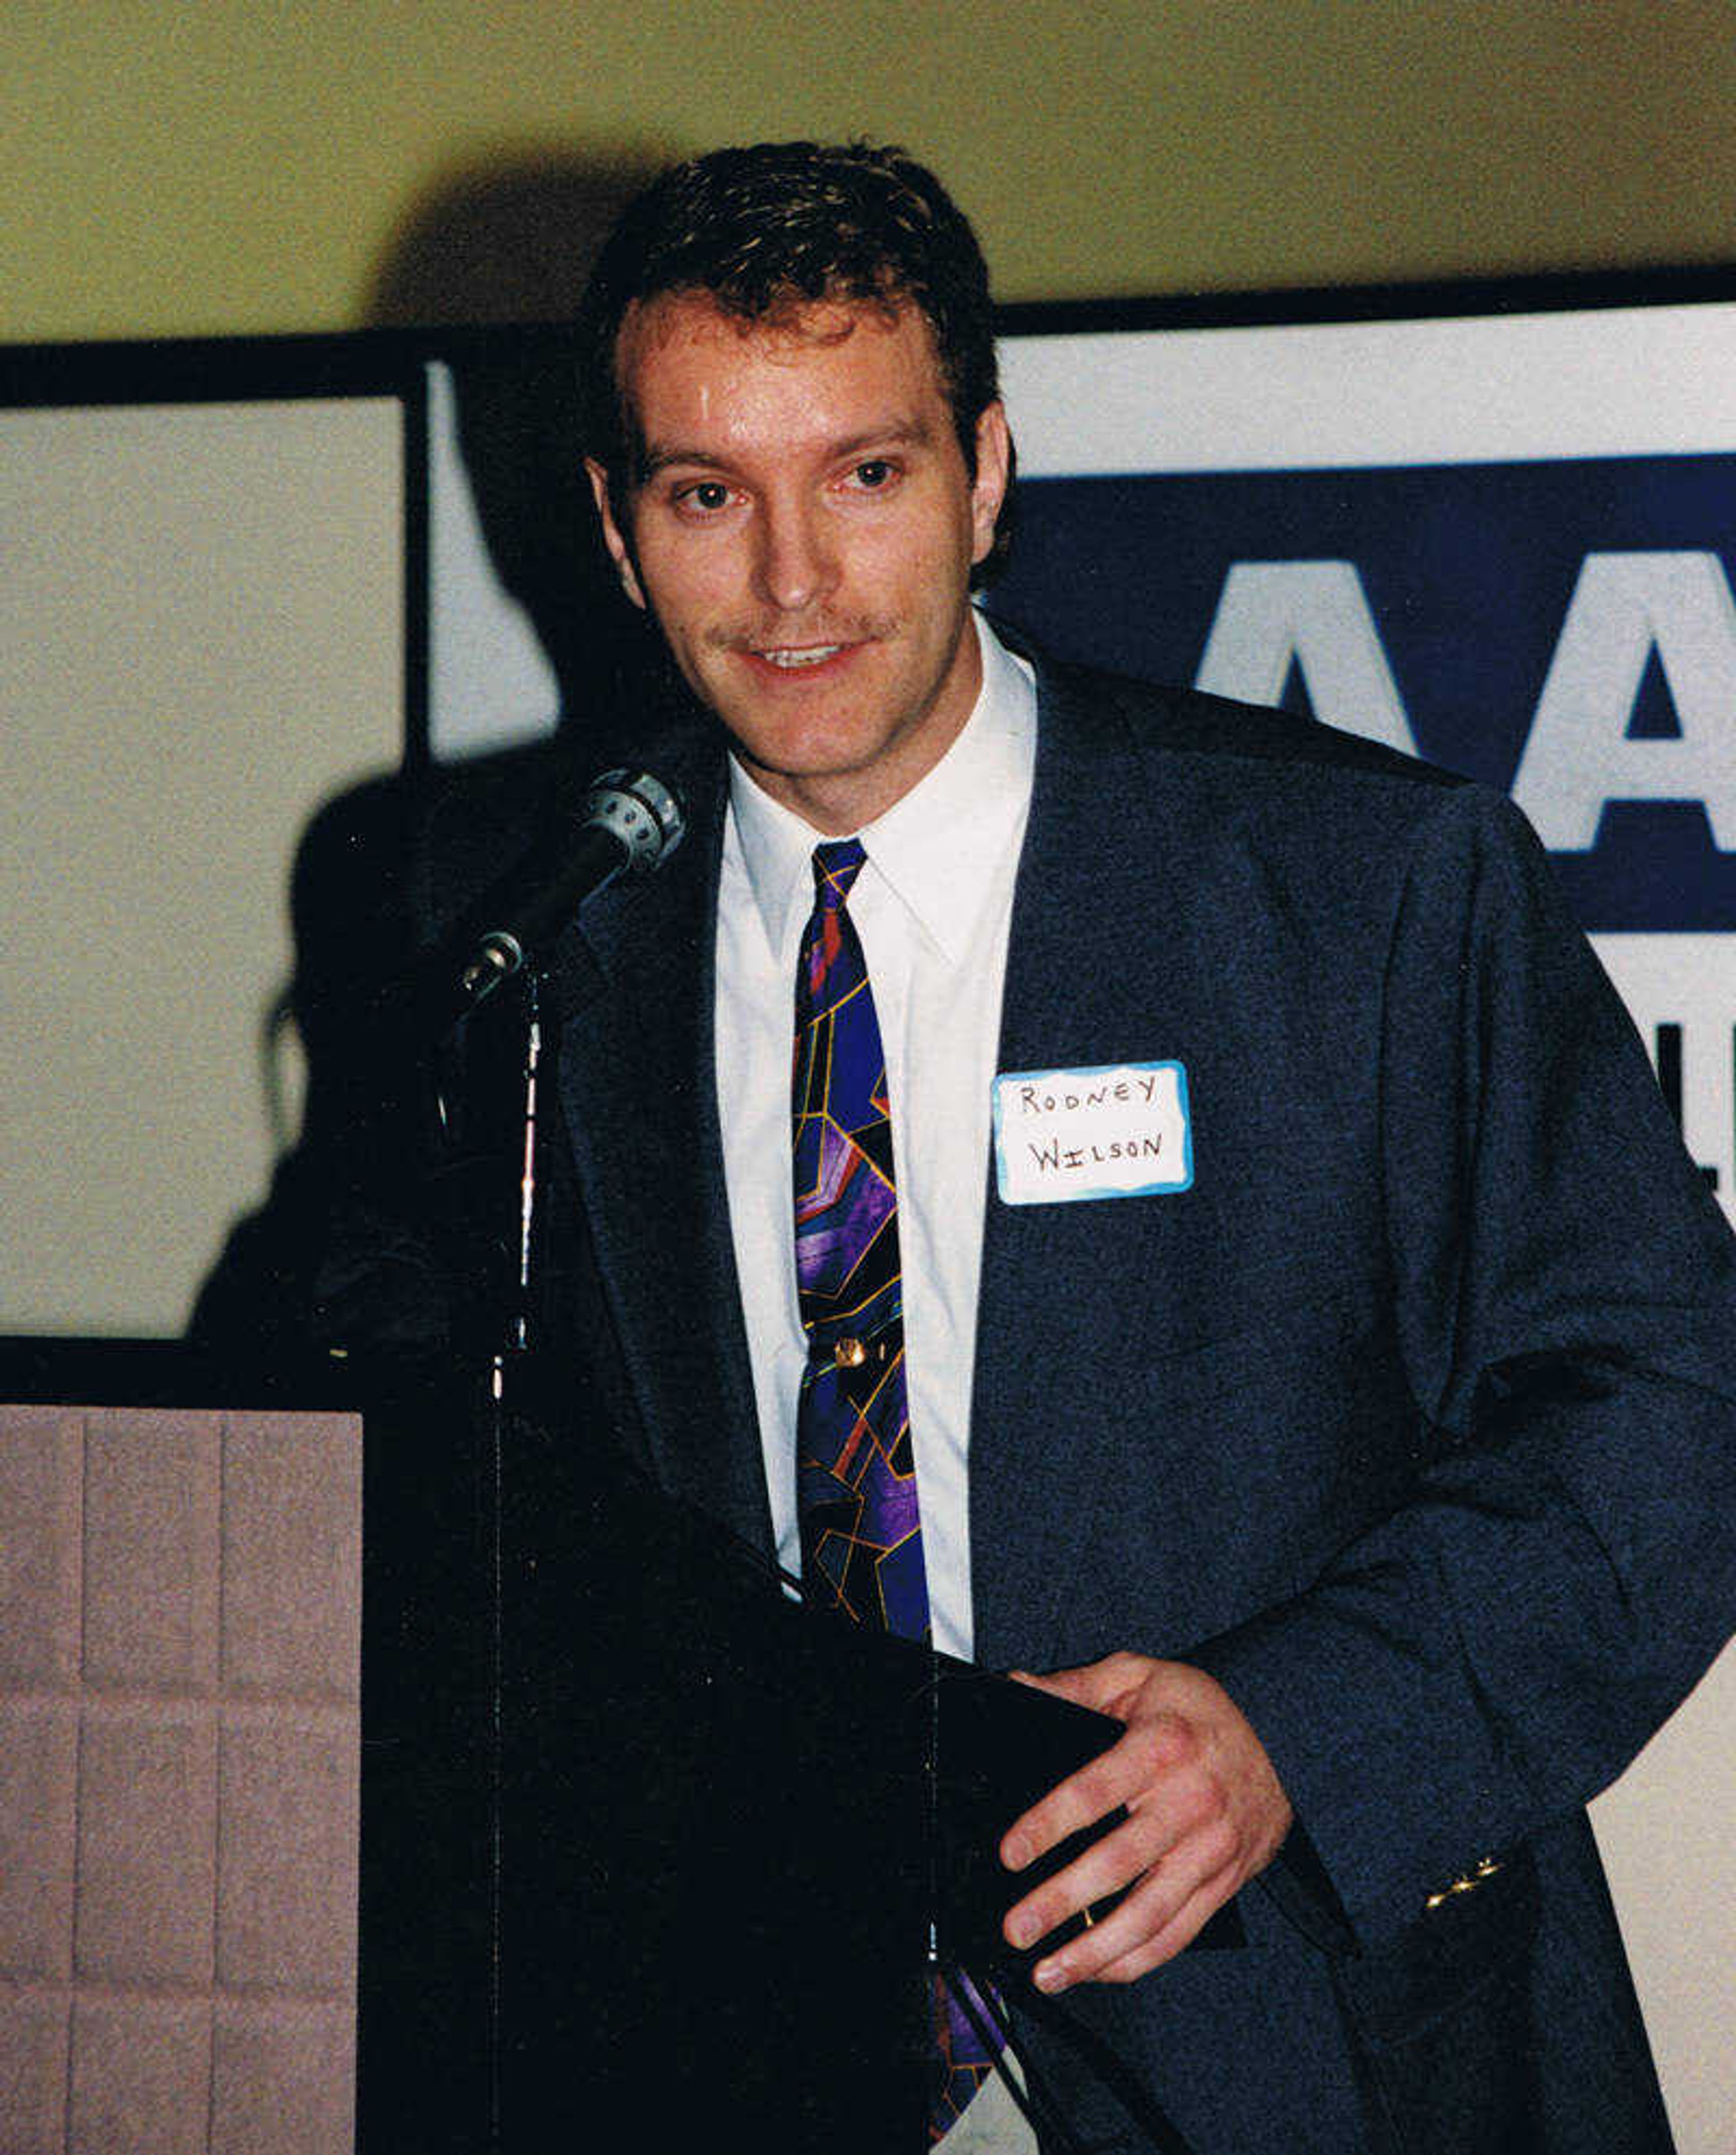 Rodney Wilson speaks about LGBT History Month at a GLAAD function in 1996.